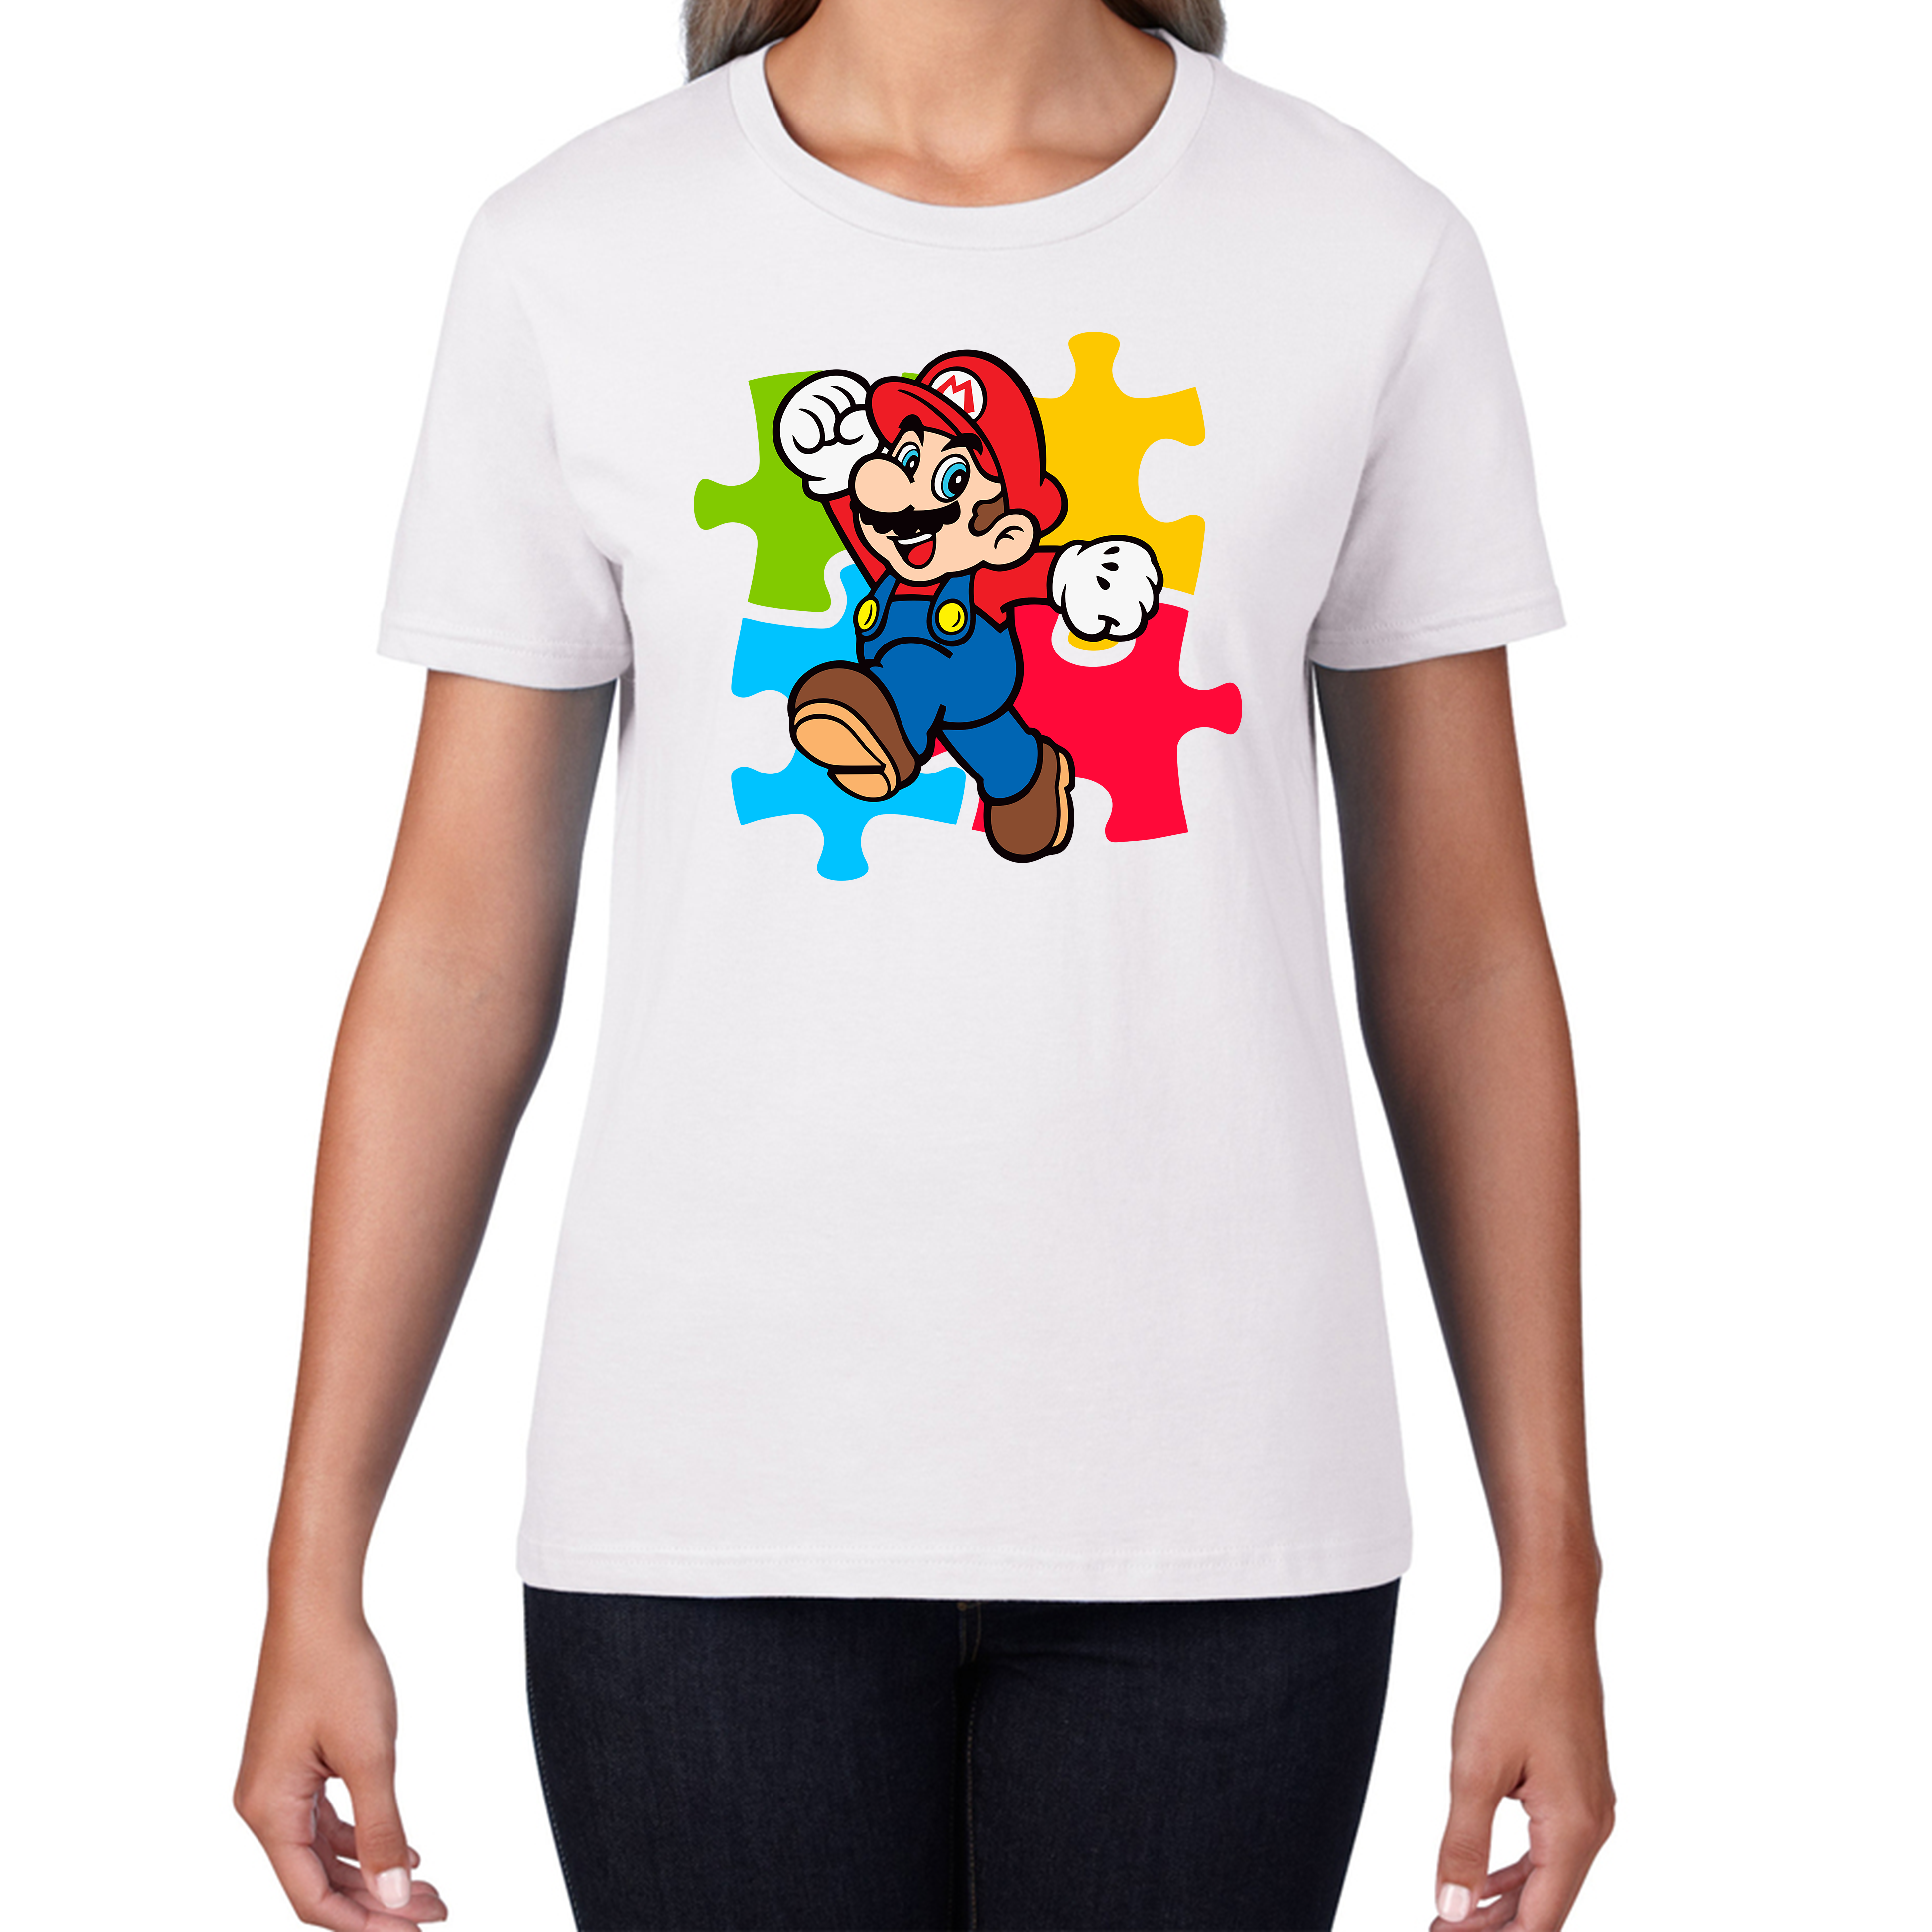 Super Mario T-Shirt Funny Game Lovers Players Video Game Womens Tee Top